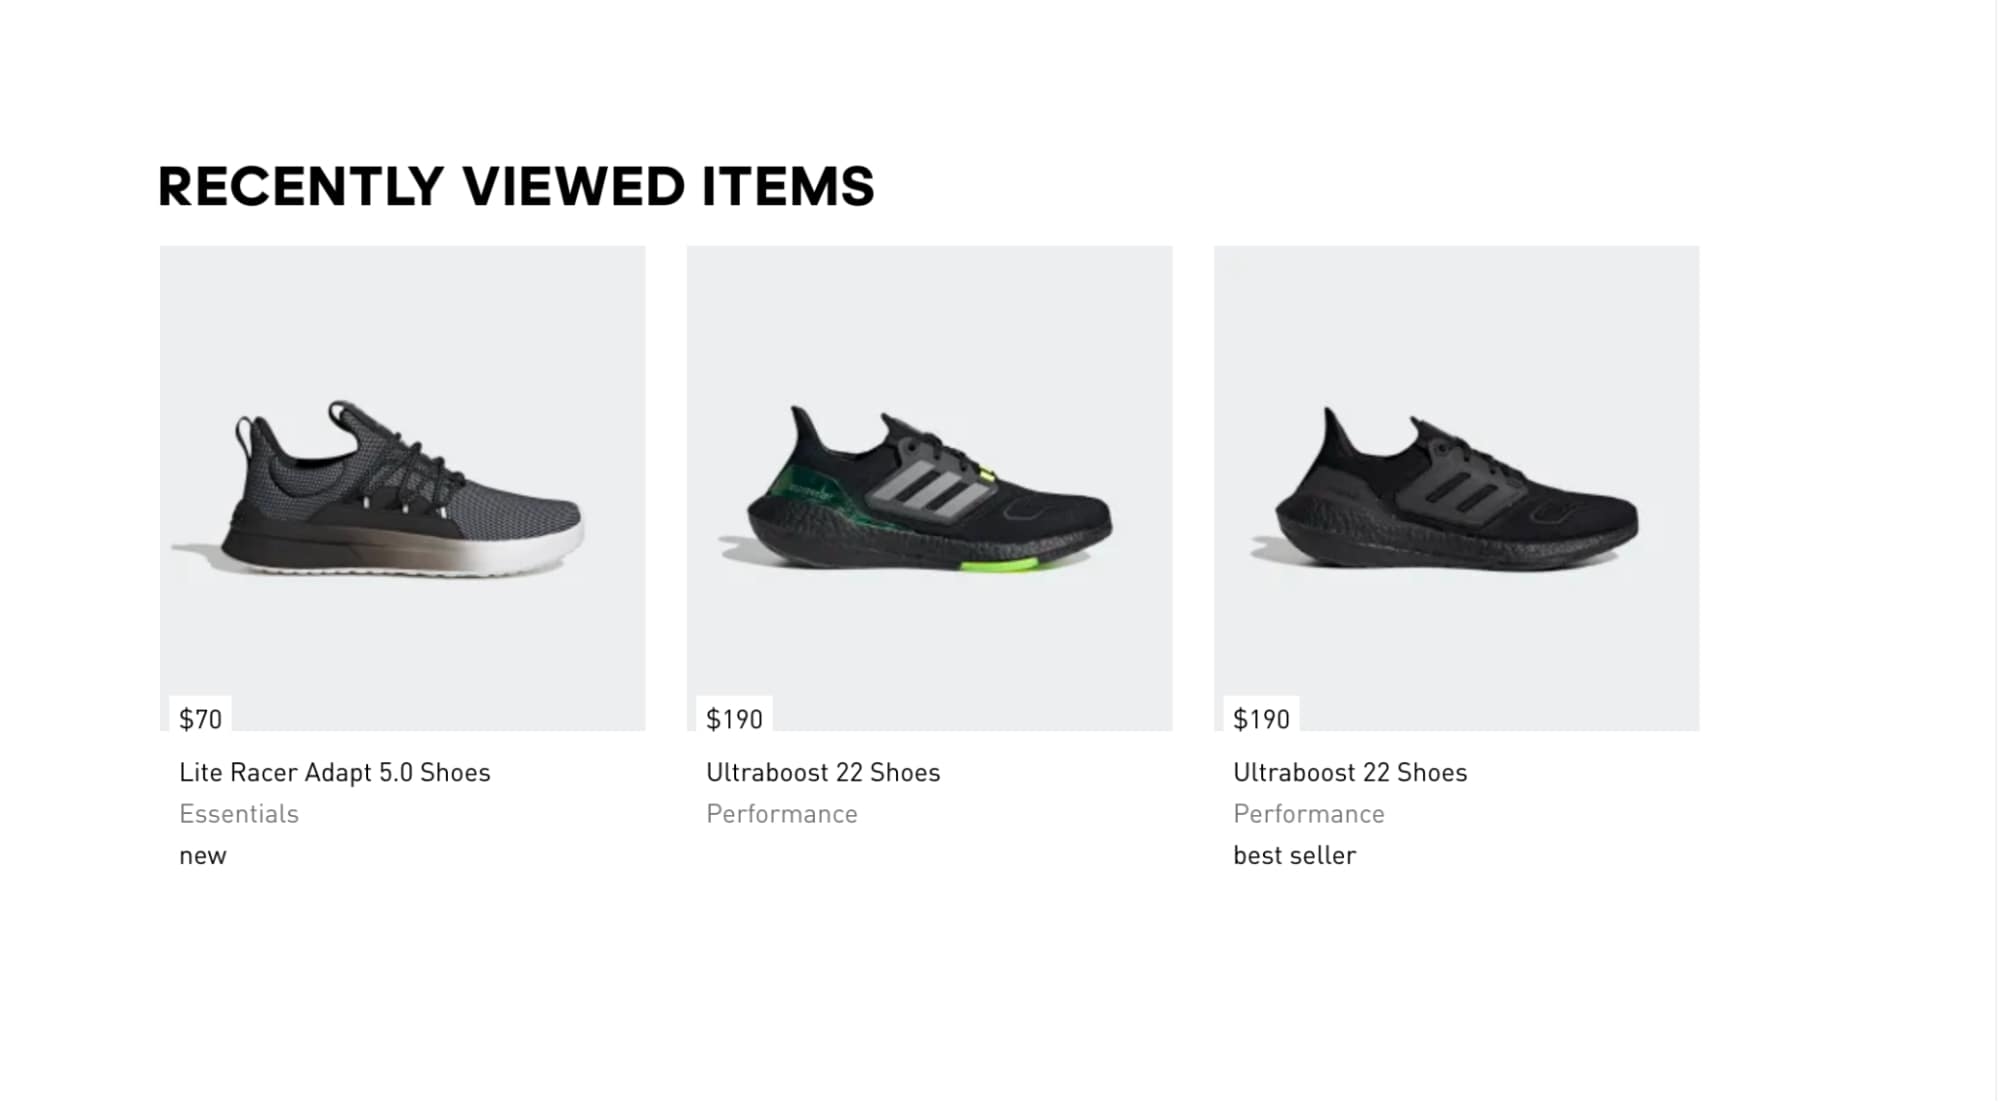 "Recently Viewed Items" feature from the Adidas.com website